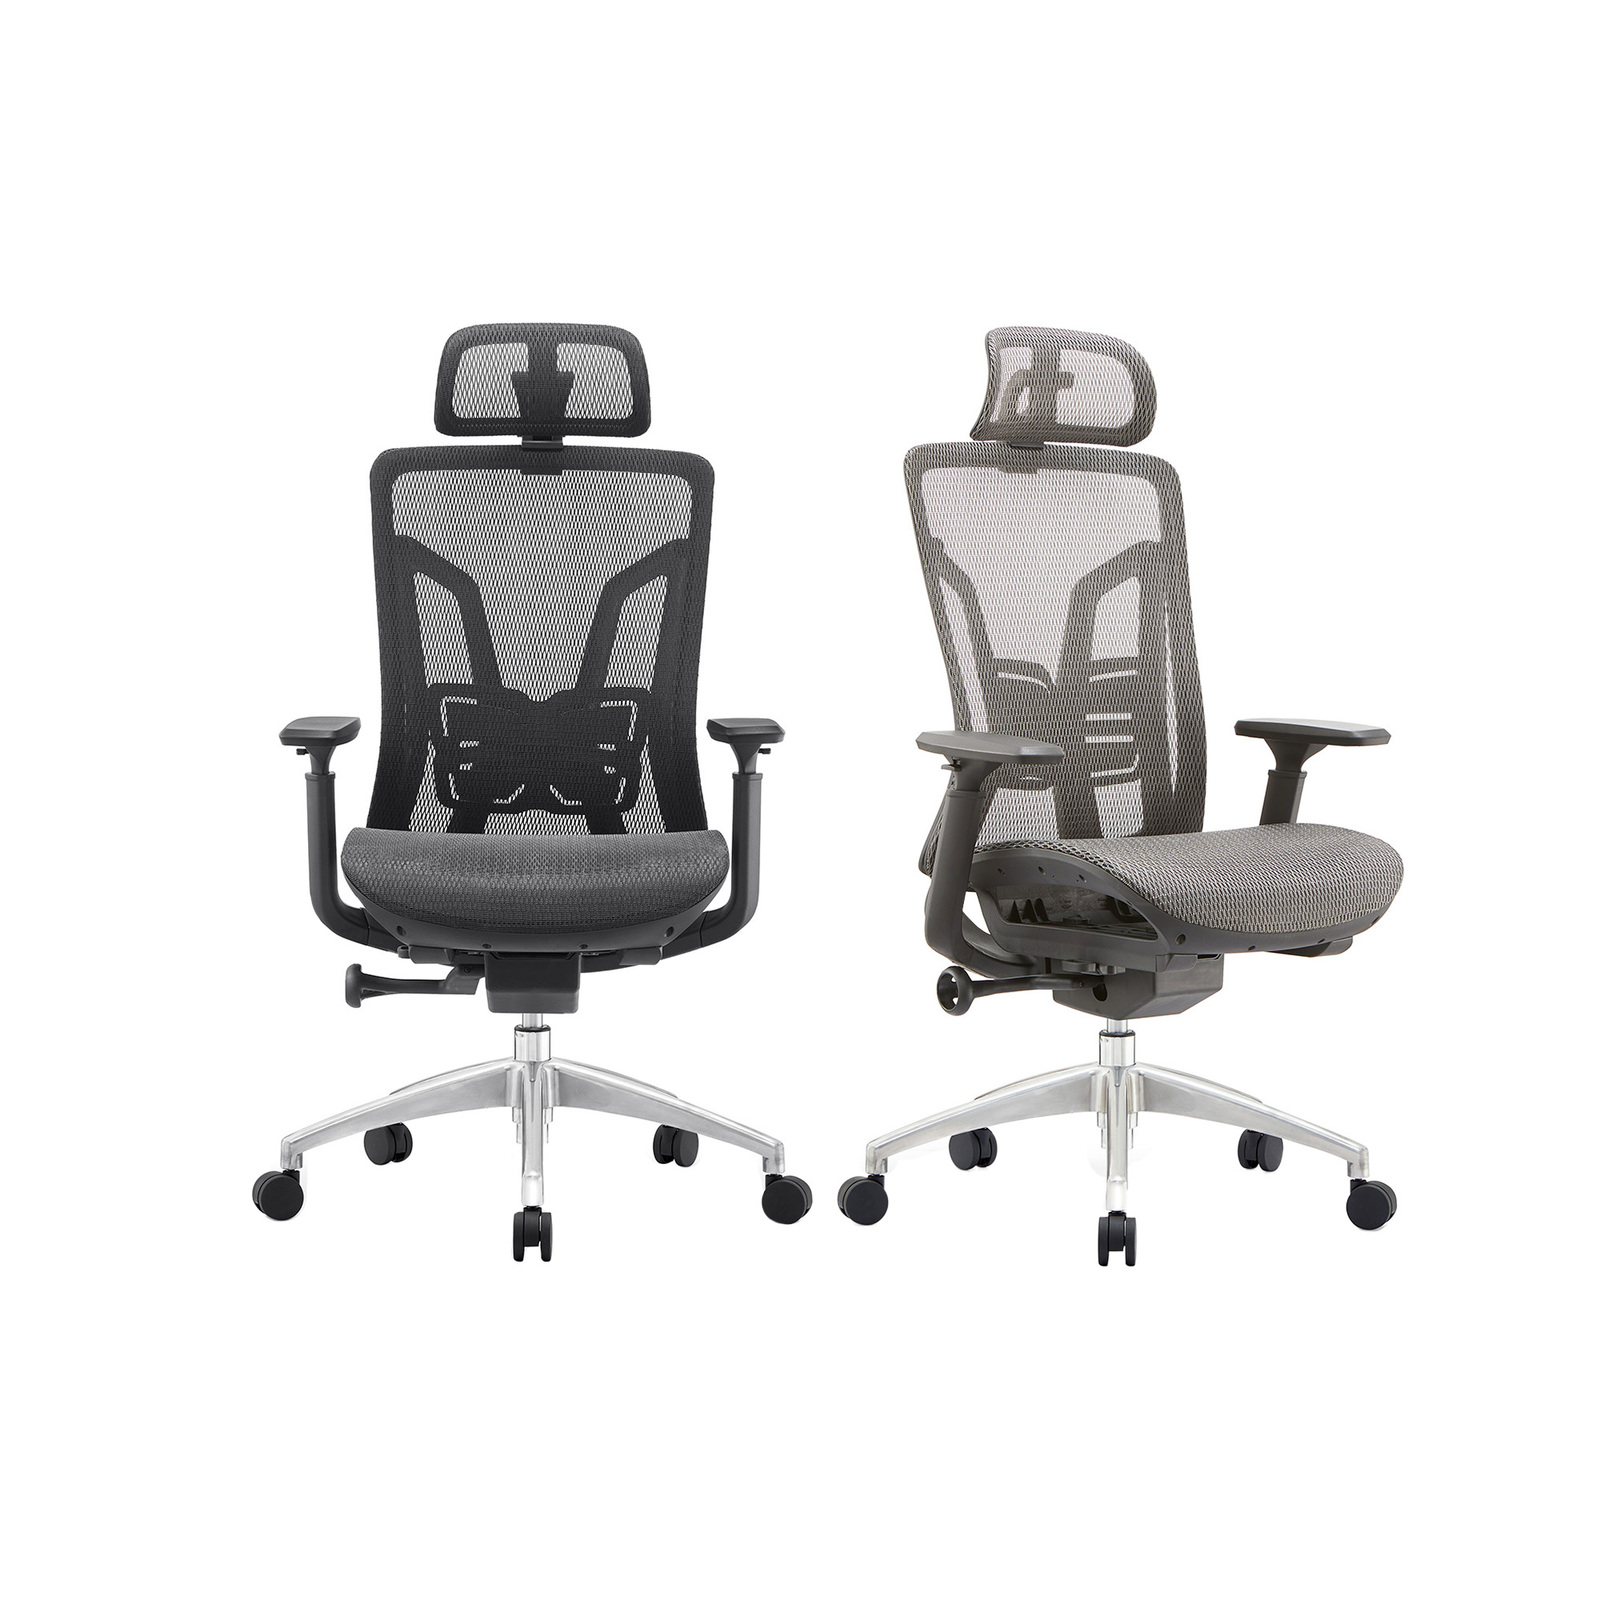 Ergonomic Mesh Work Study Computer Gaming Office Desk Chairs Executive Adjustable Recliner Seat 